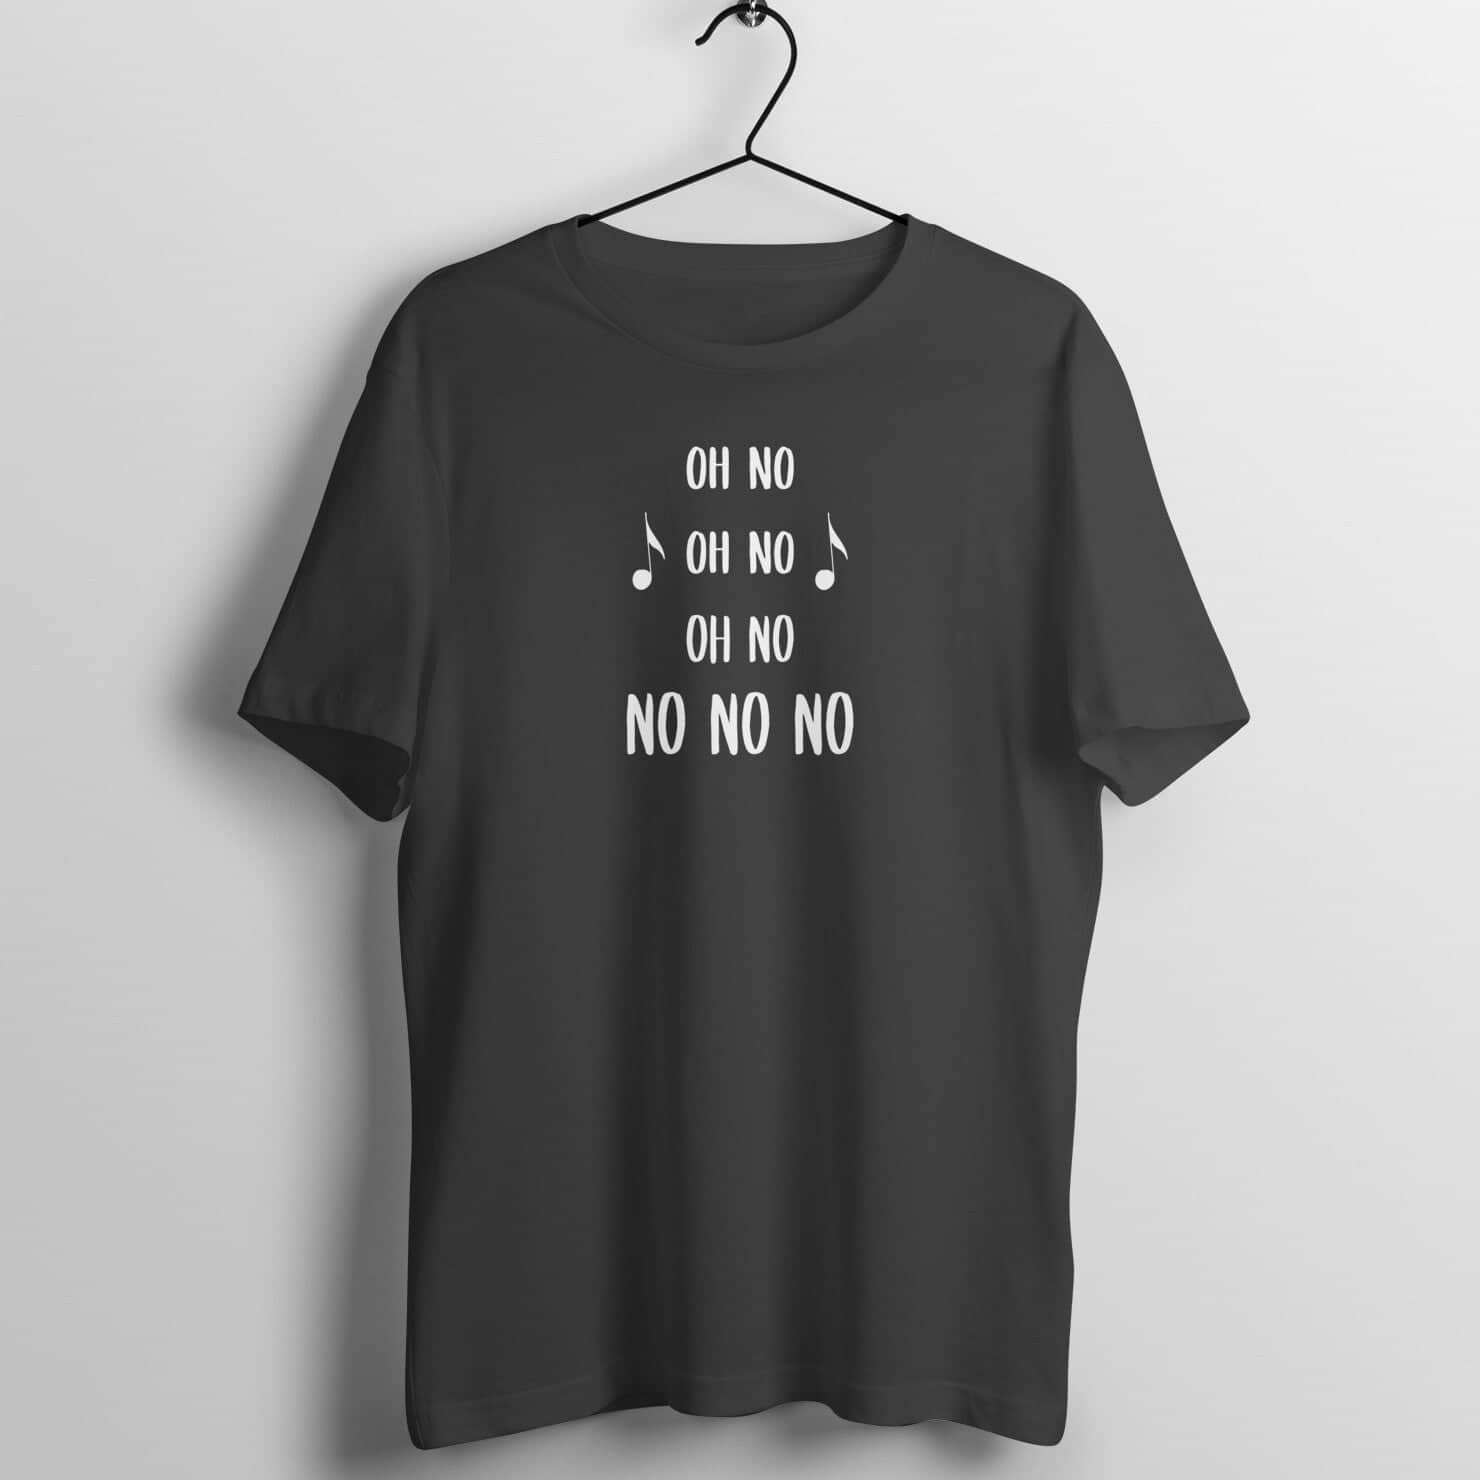 Oh No Oh No Oh No No No No Official Song Lyrics T Shirt for Men and Women freeshipping - Catch My Drift India